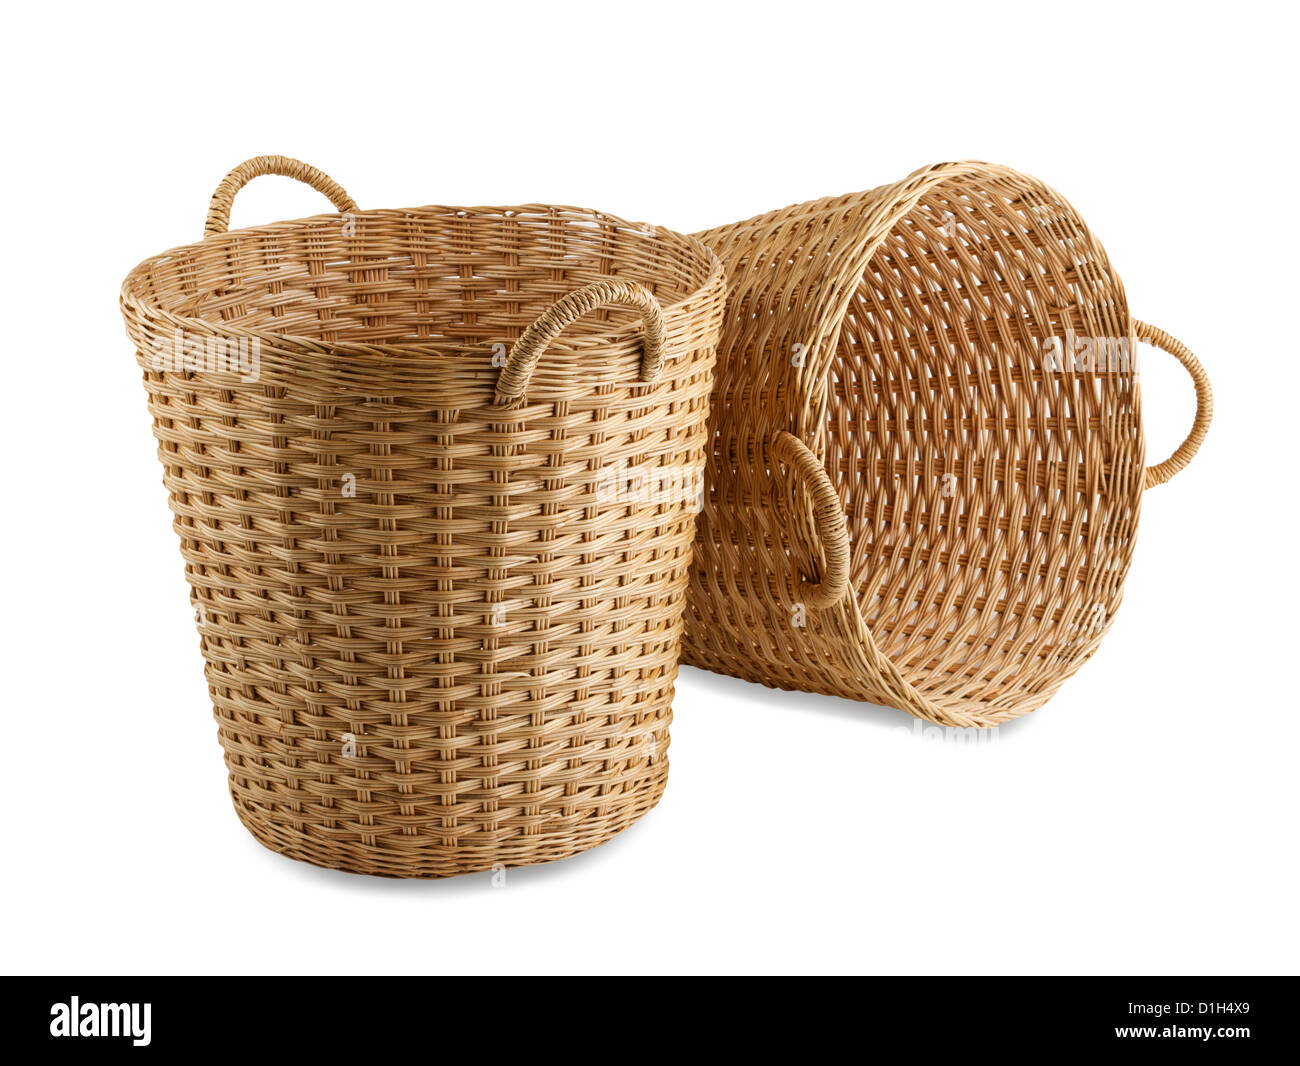 Handmade rattan basket the old fashioned Thai style isolated Stock Photo